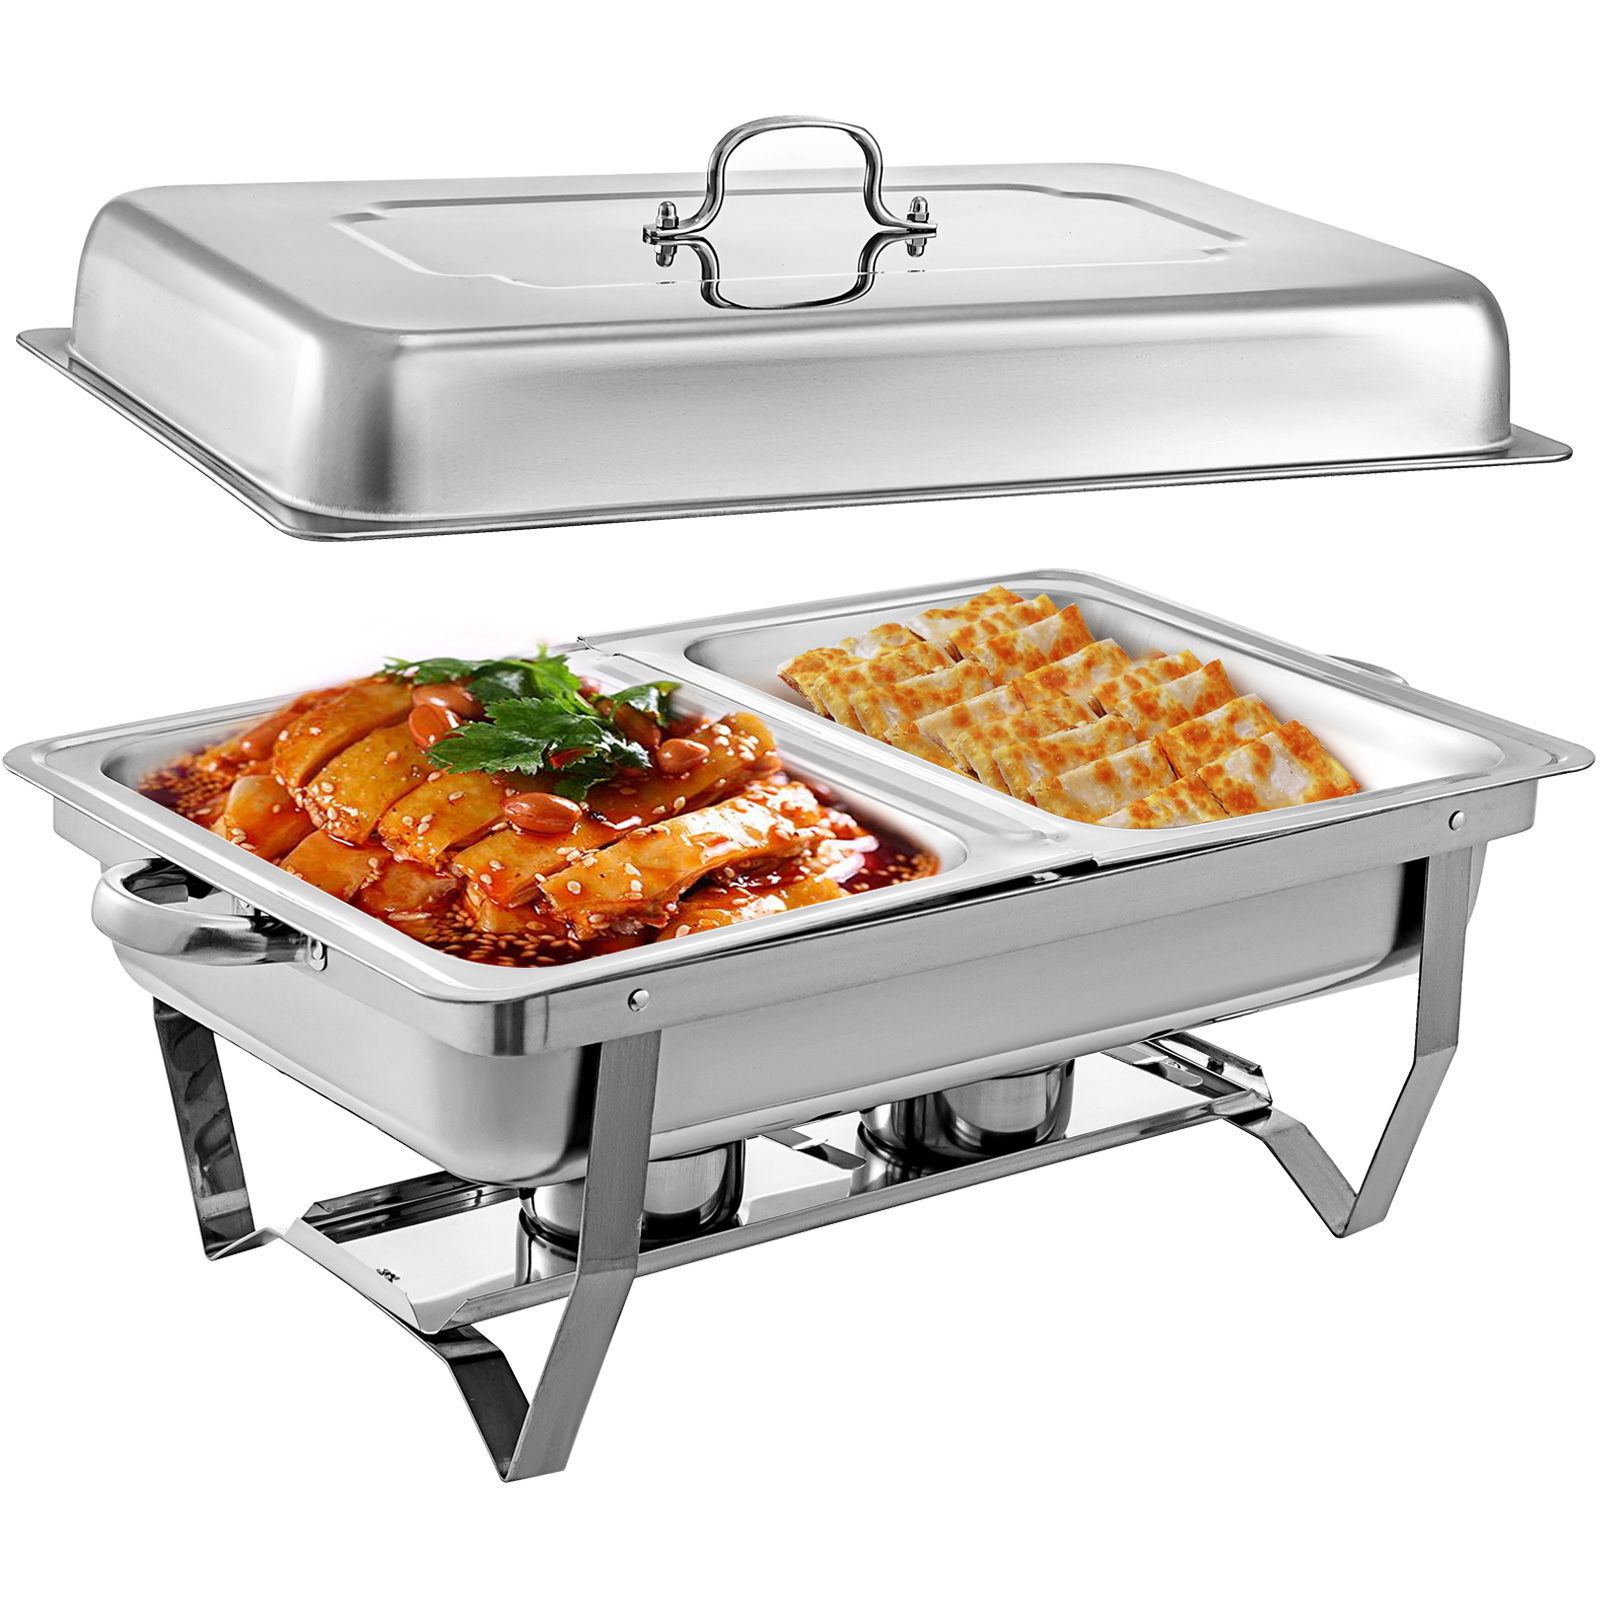 Stainless Steel Chafing Dishes L With Inserts Chafer Buffet